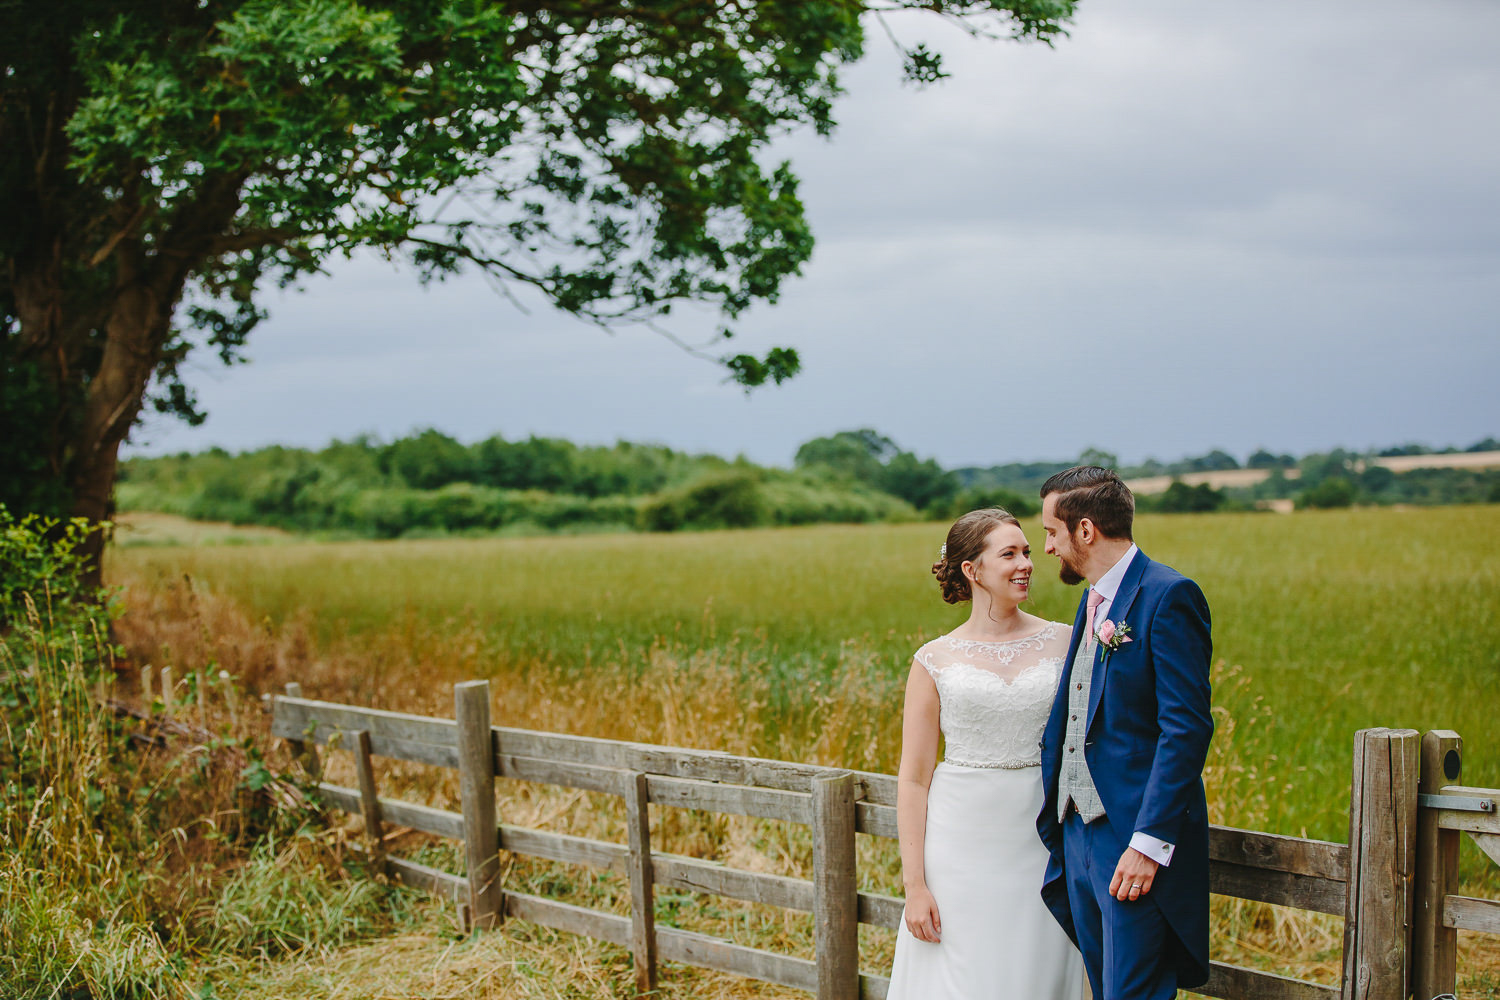 Bride and groom by a fence, near a field